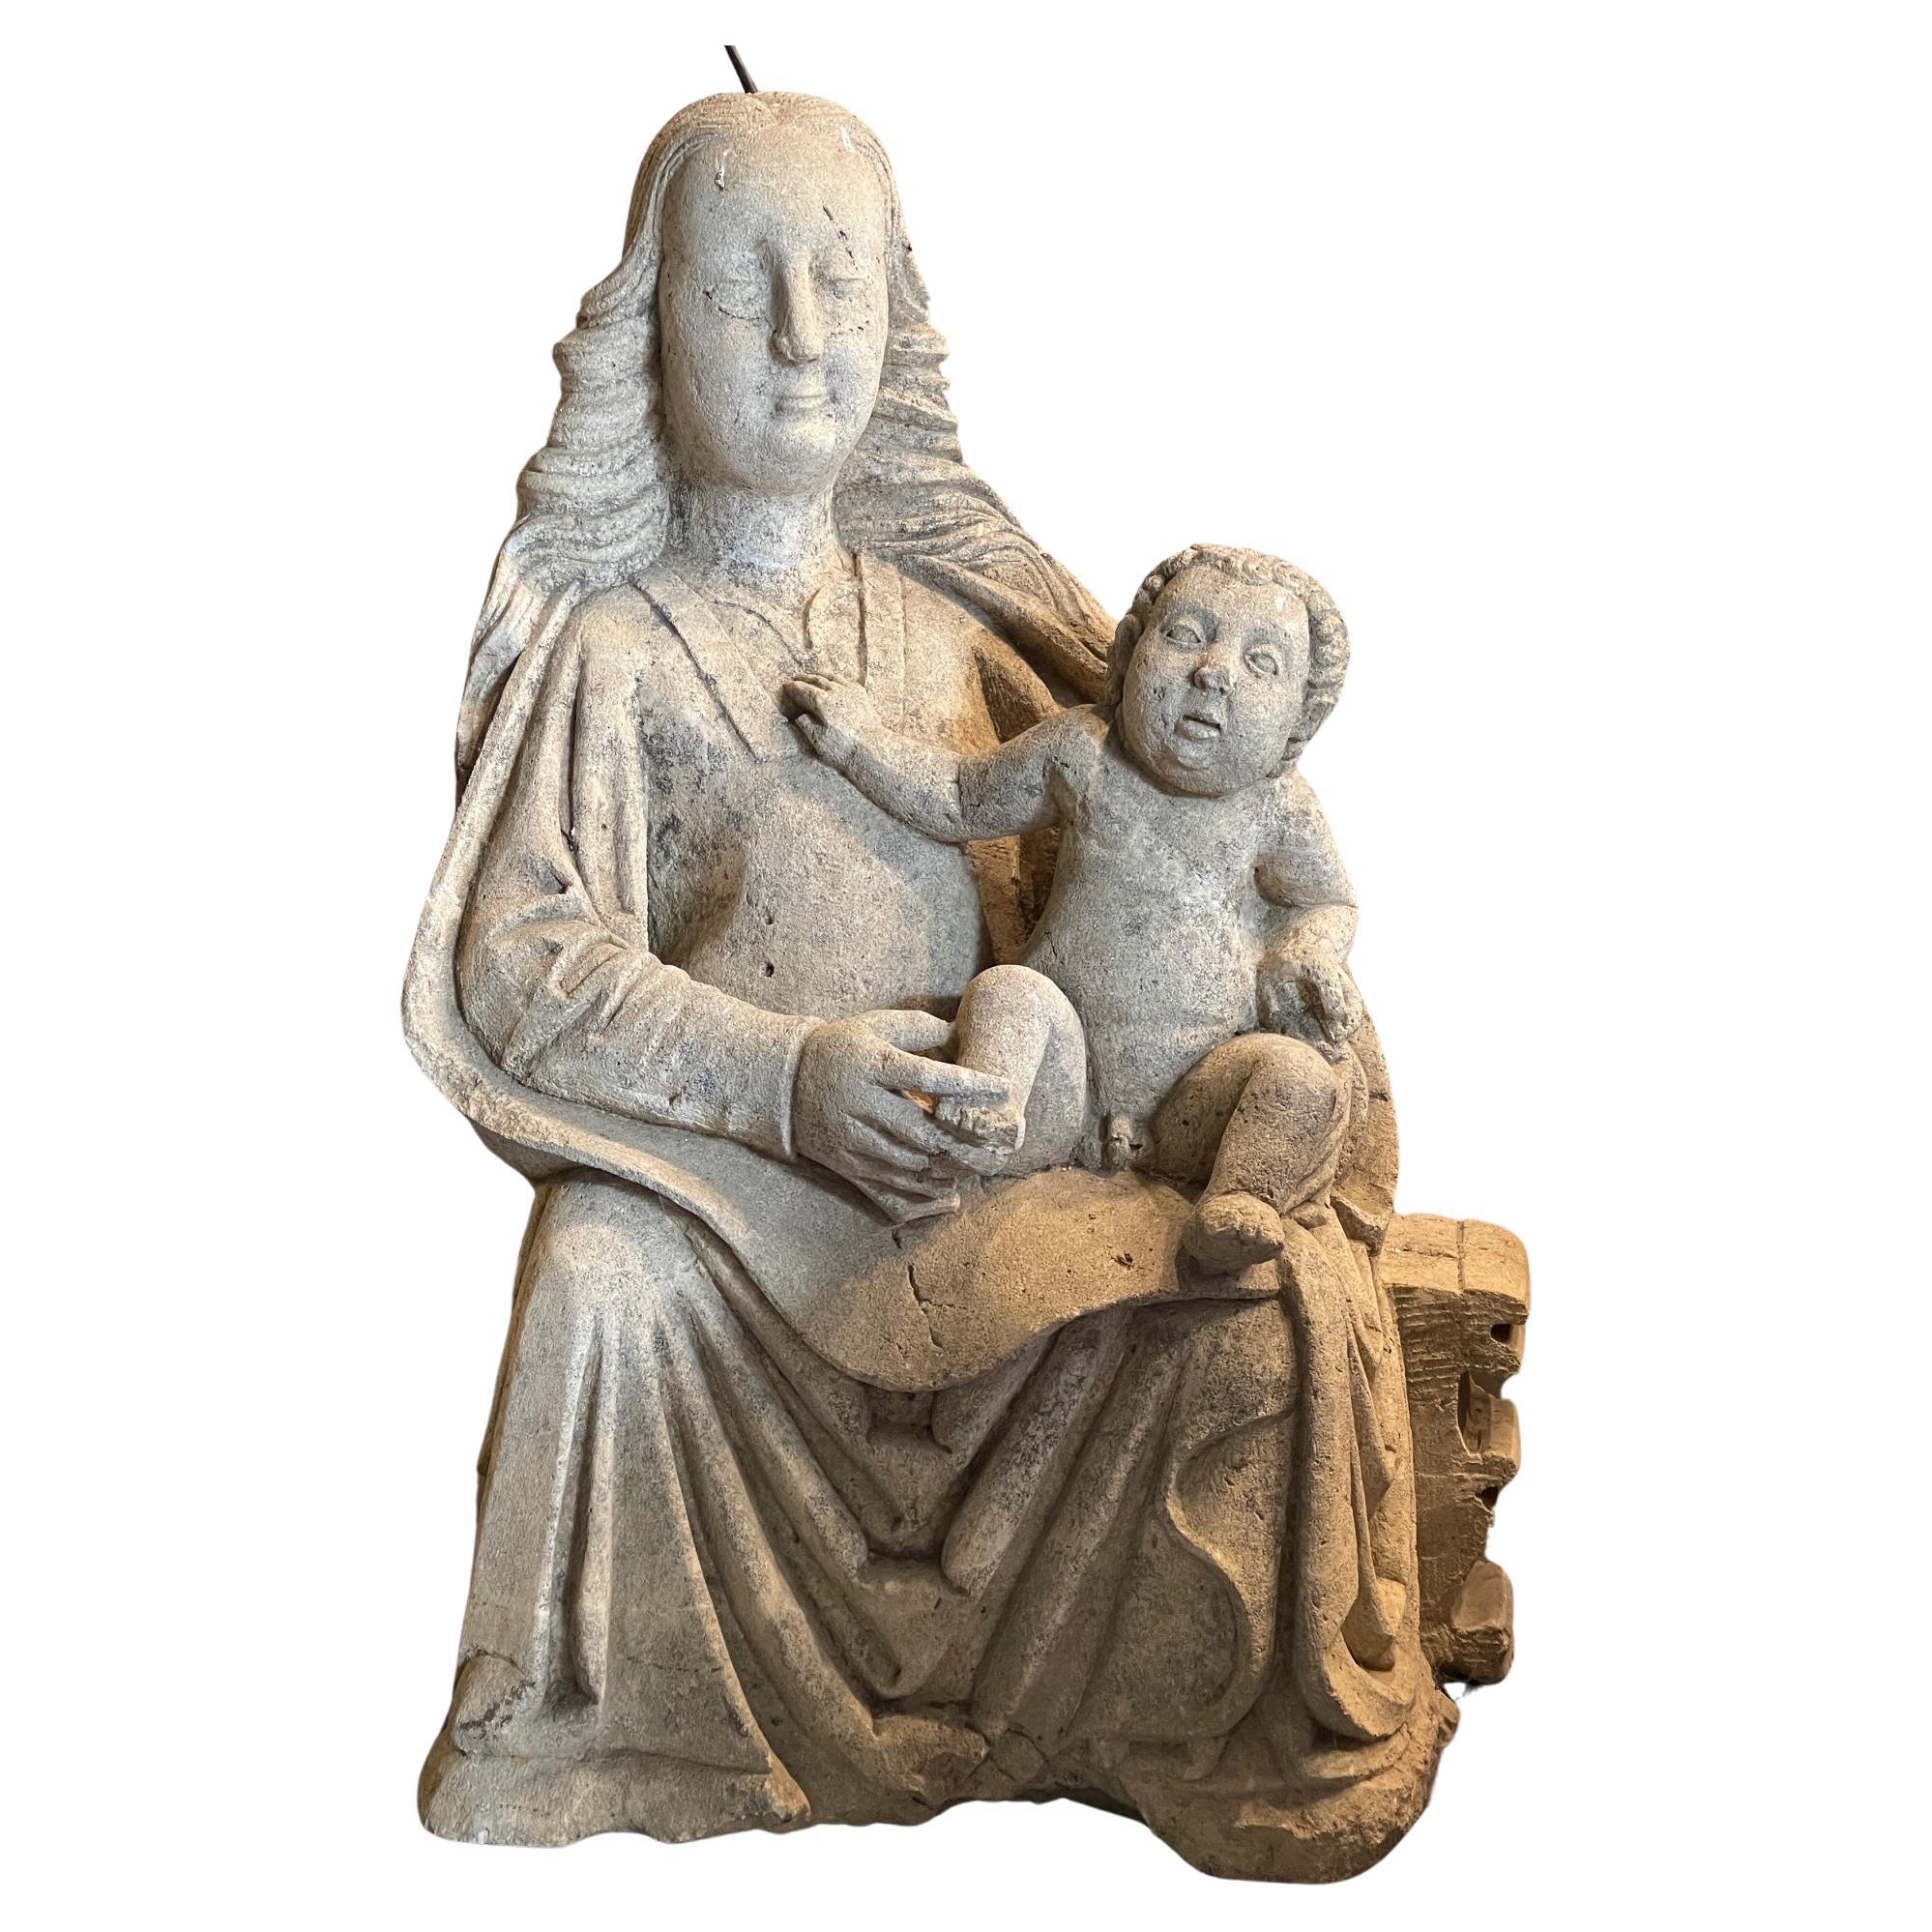 C1350 limestone sculpture of seated Madonna with 6 fingers on her right hand